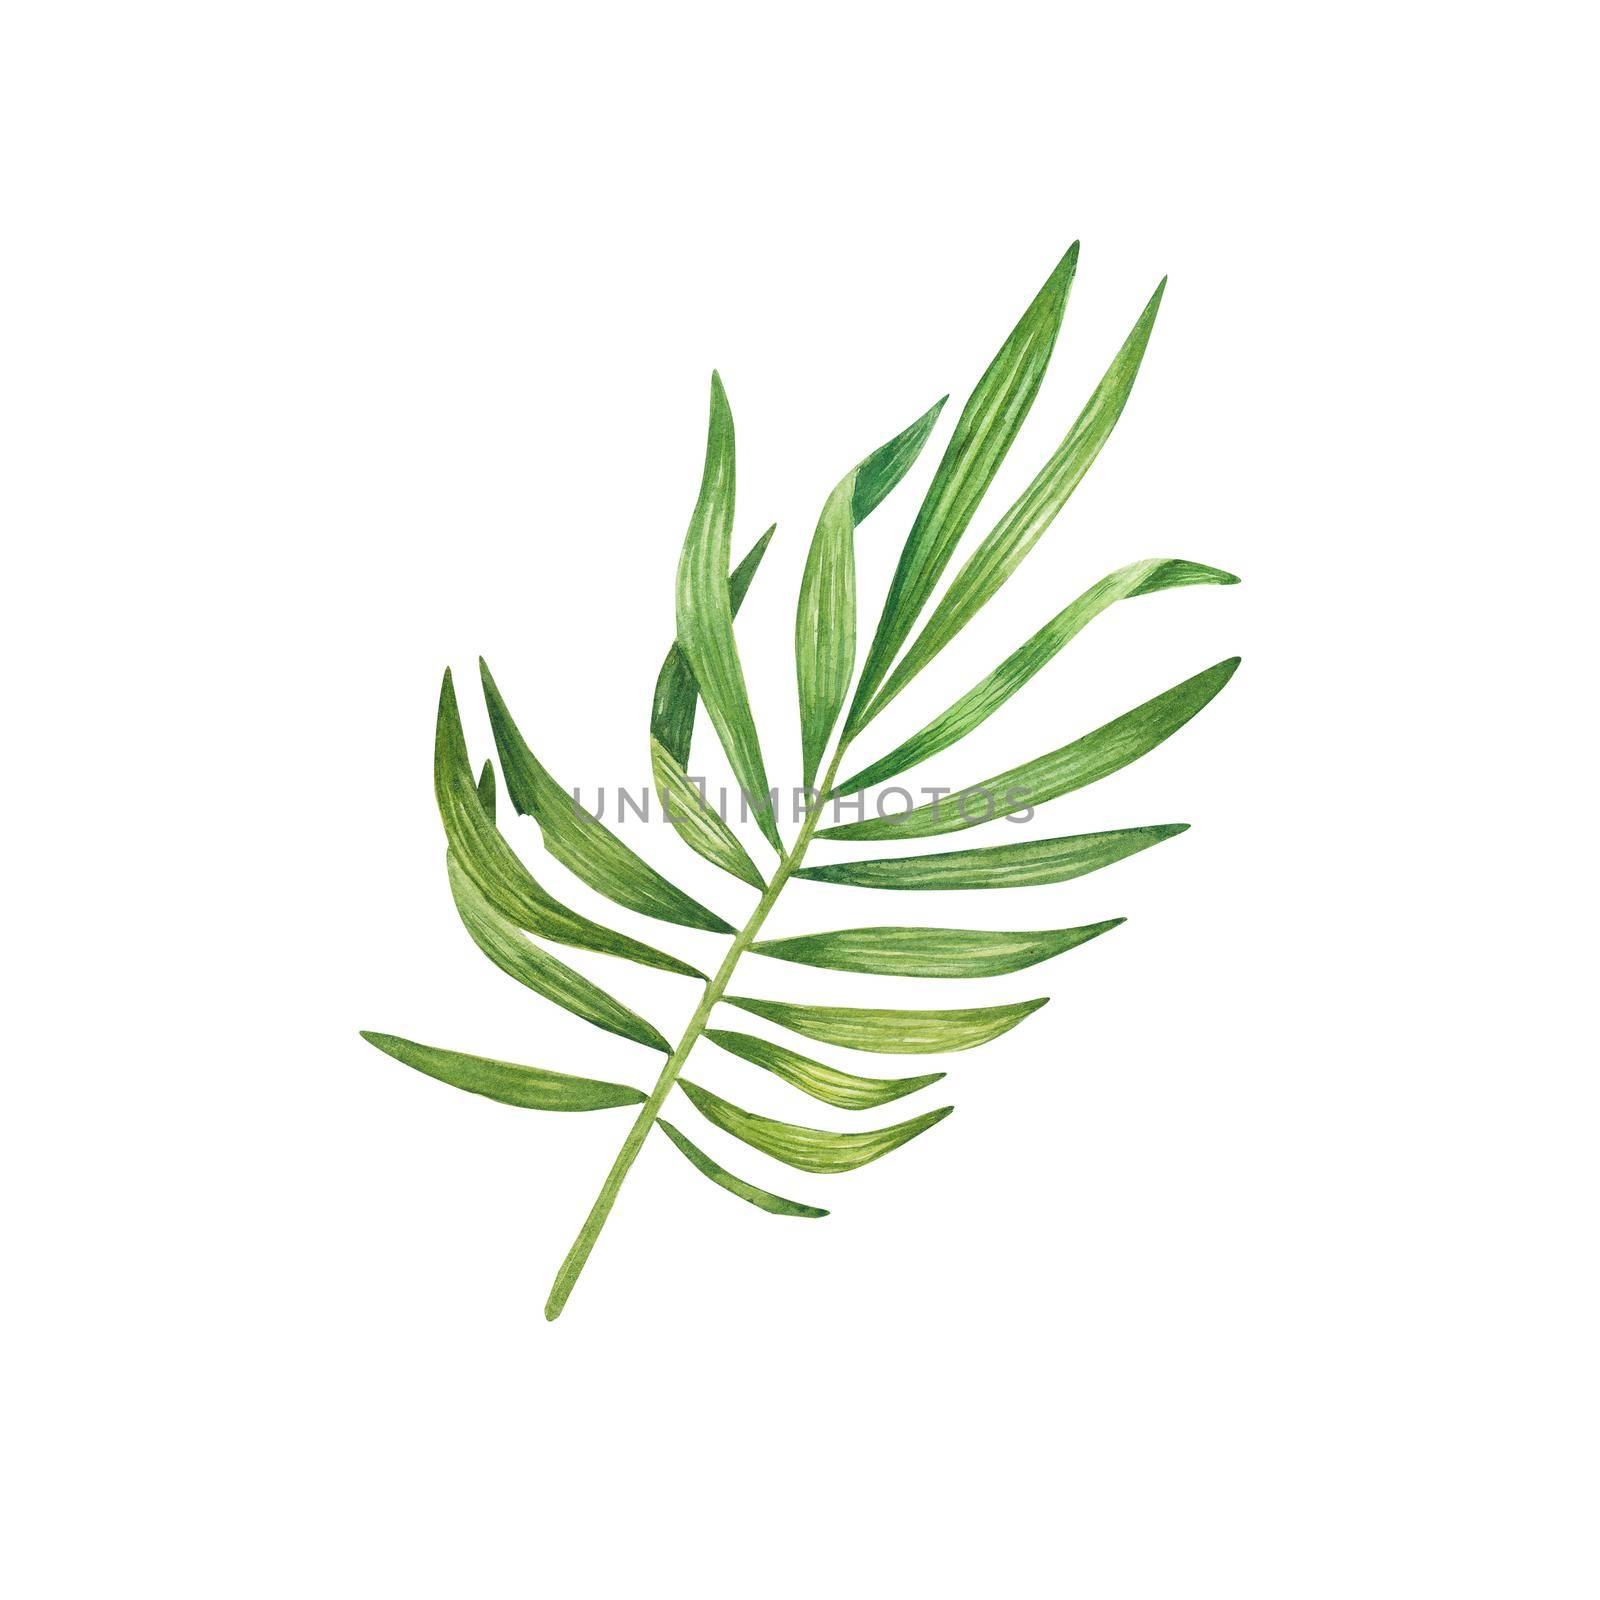 Exotic green plant in watercolor. Tropical leaves, palm leaf, bamboo. Isolated on a white background. Suitable for design, invitations, wallpapers, weddings, packaging. Botanical illustration.